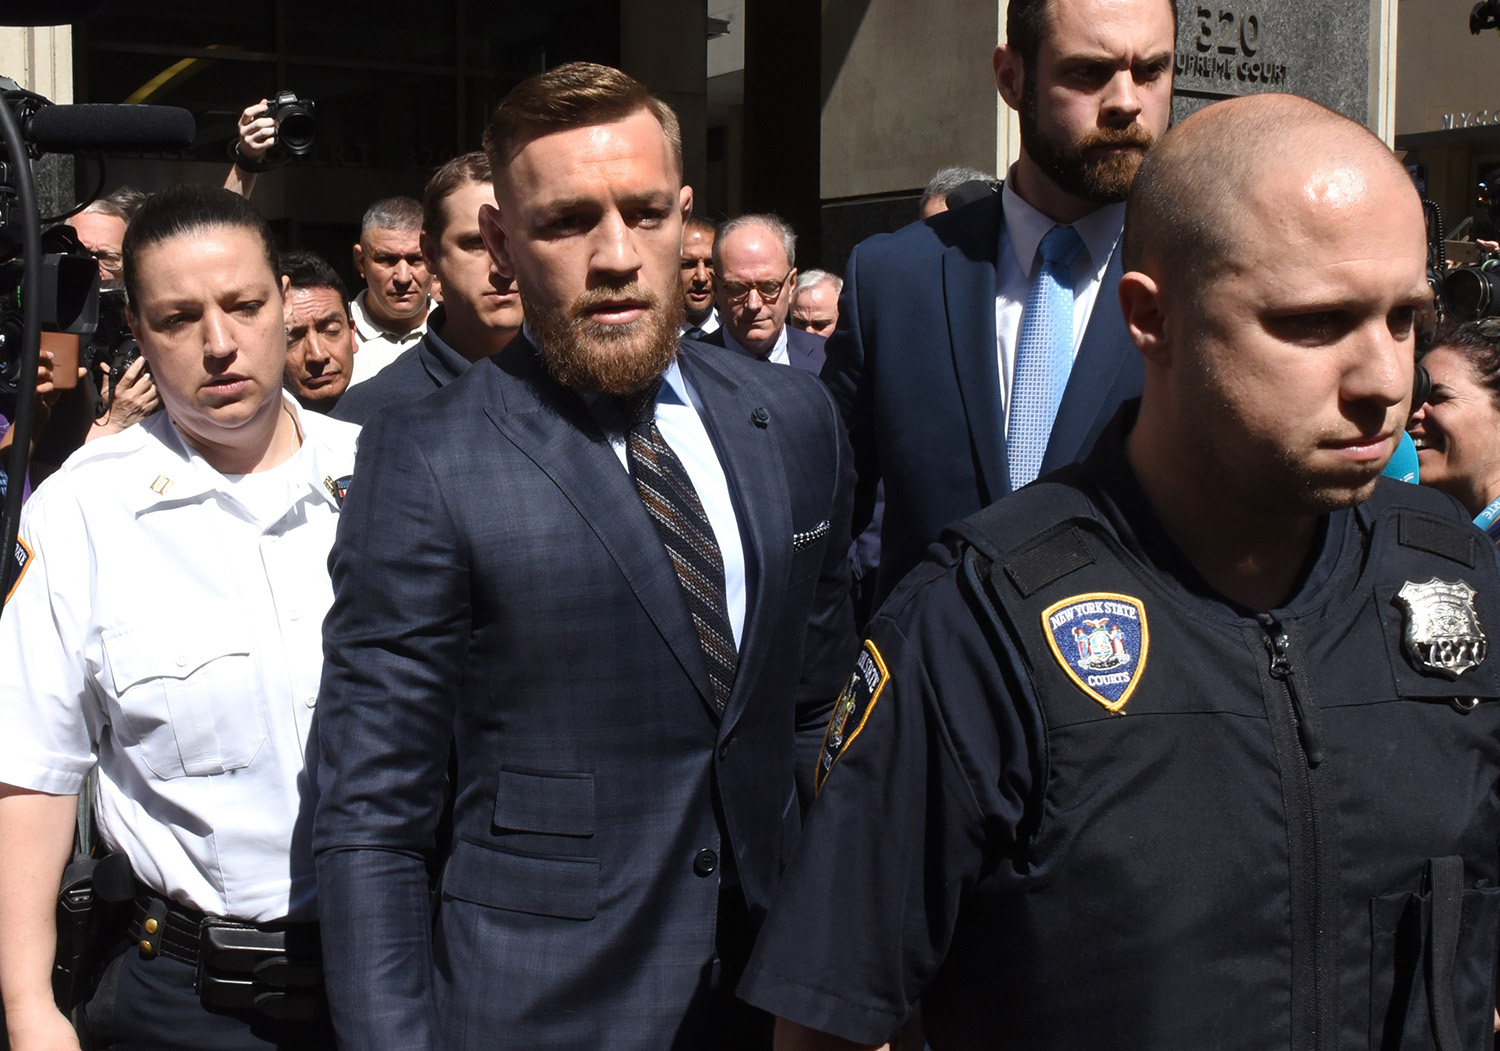 Connor McGregor wearing a suit being escorted by police to court date